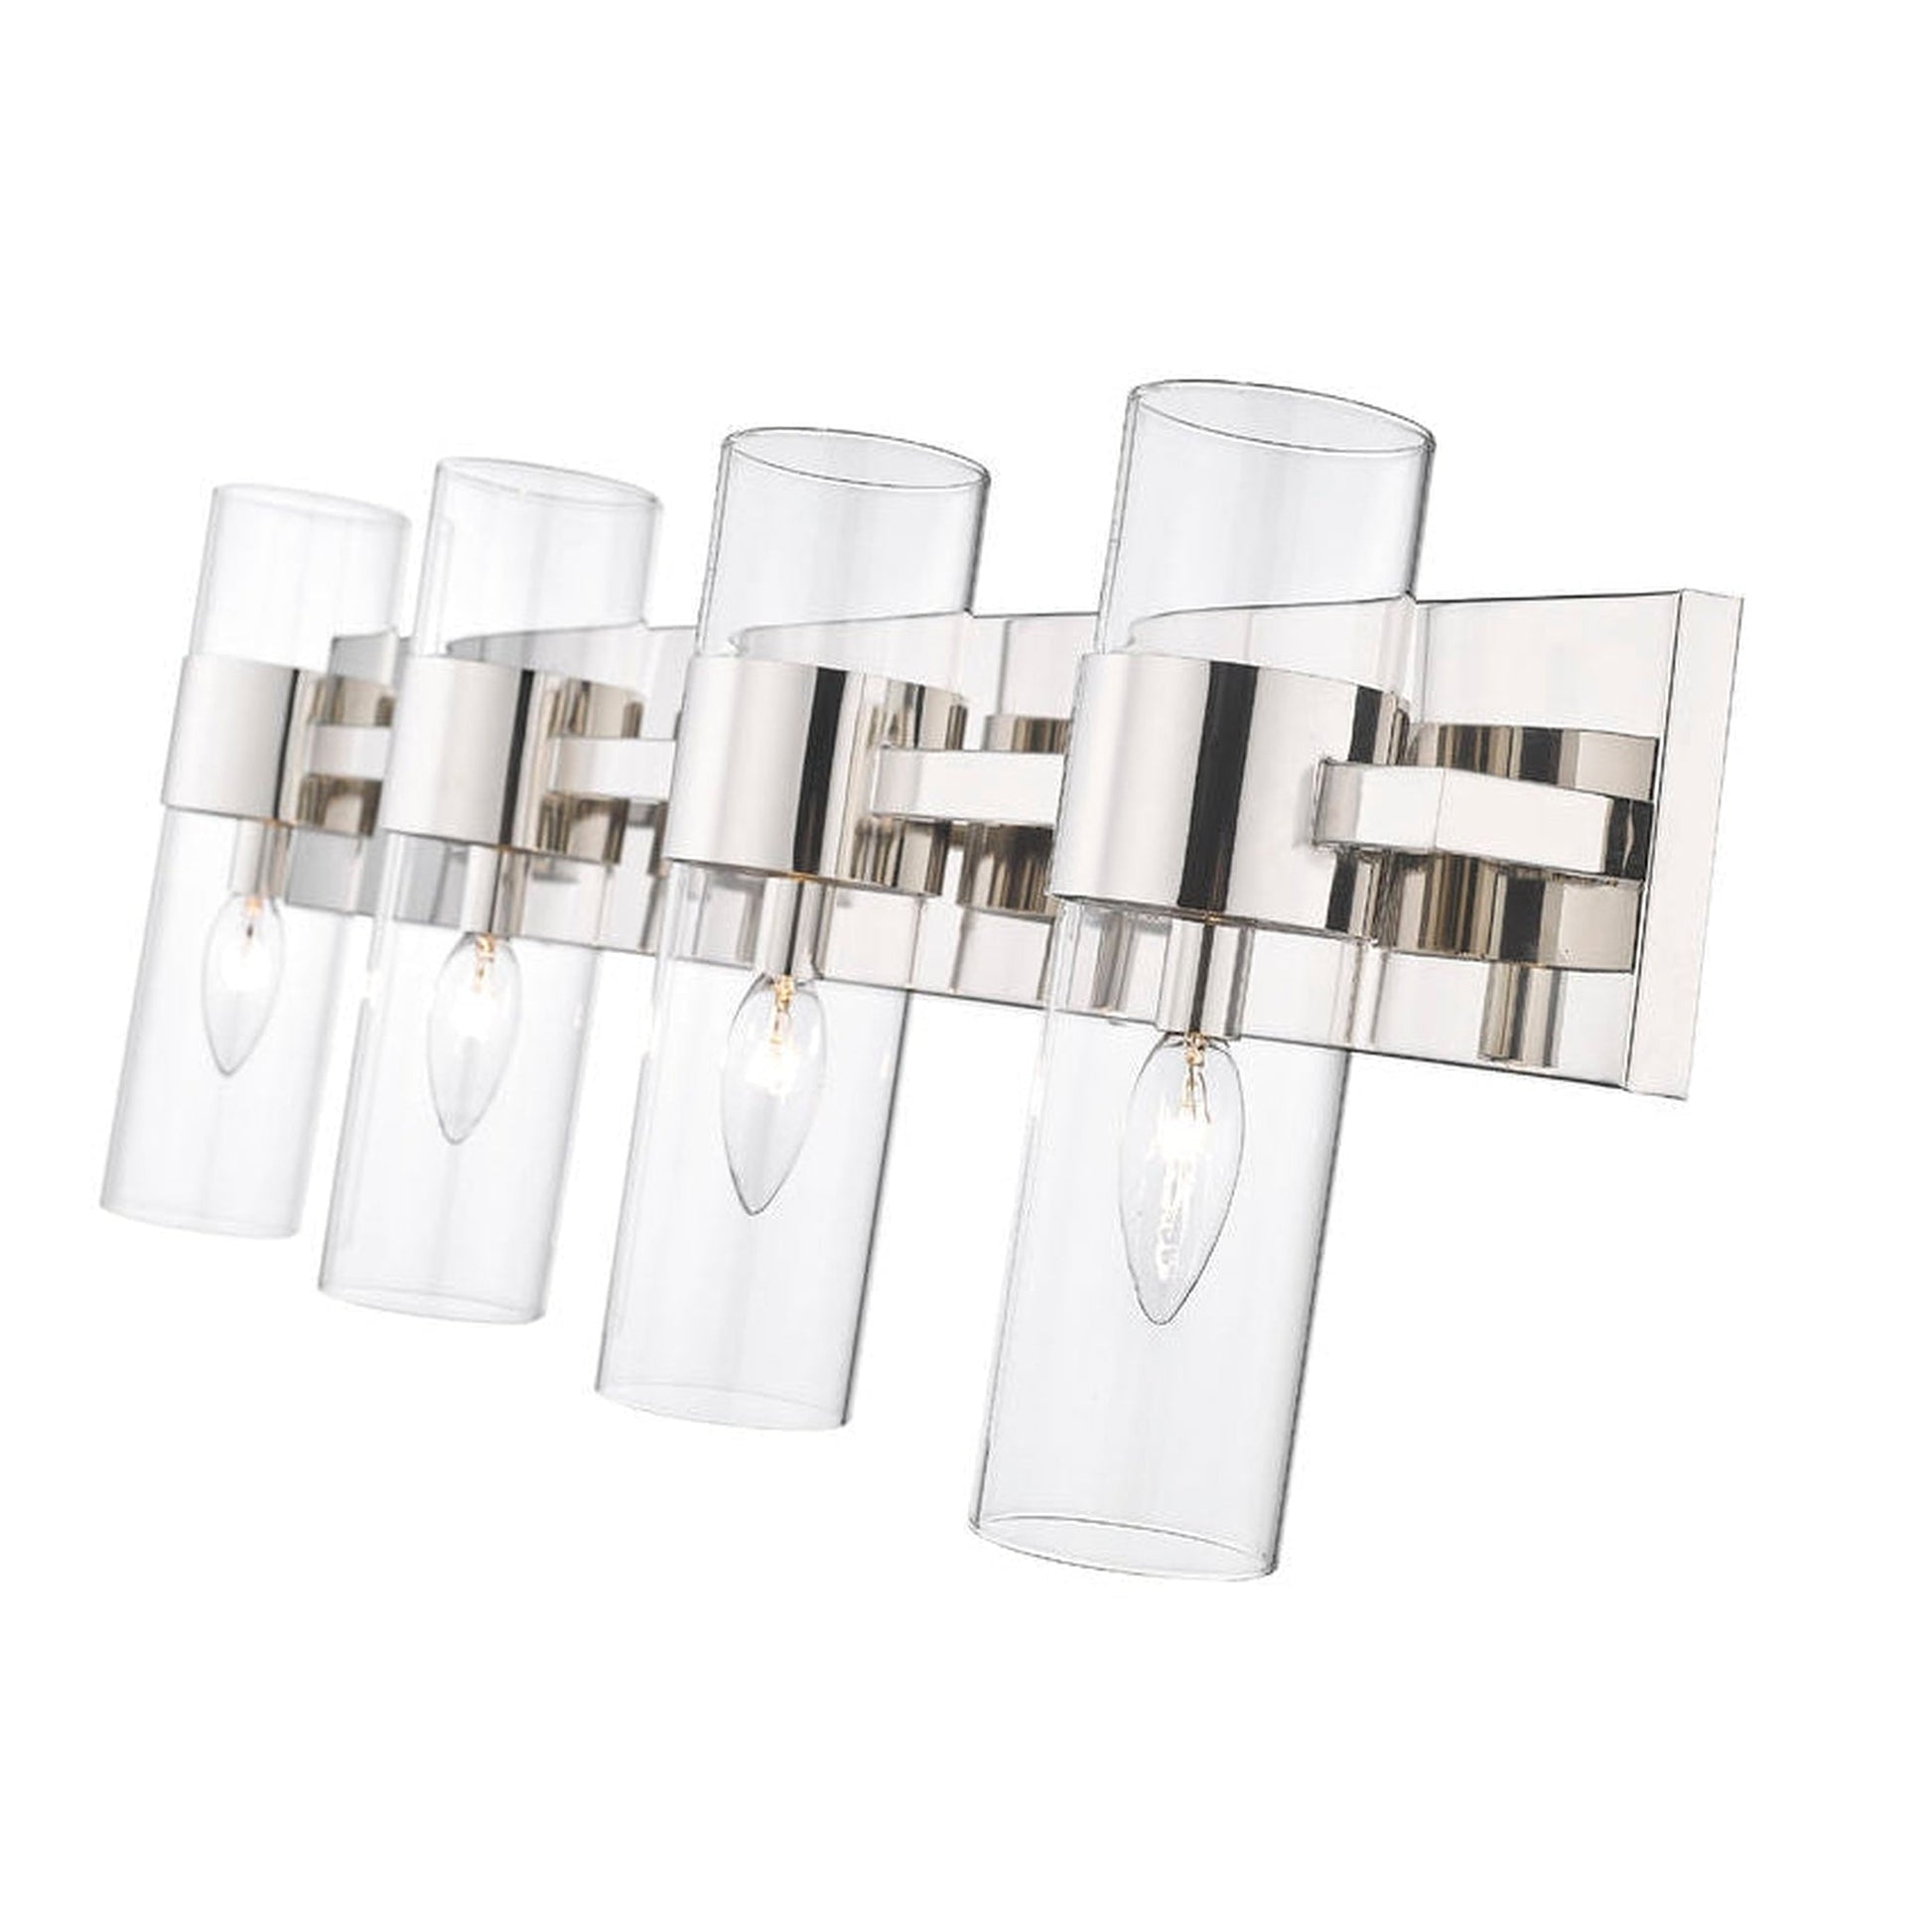 Z-Lite Lawson 32" 4-Light Polished Nickel Vanity Light With Clear Glass Shade